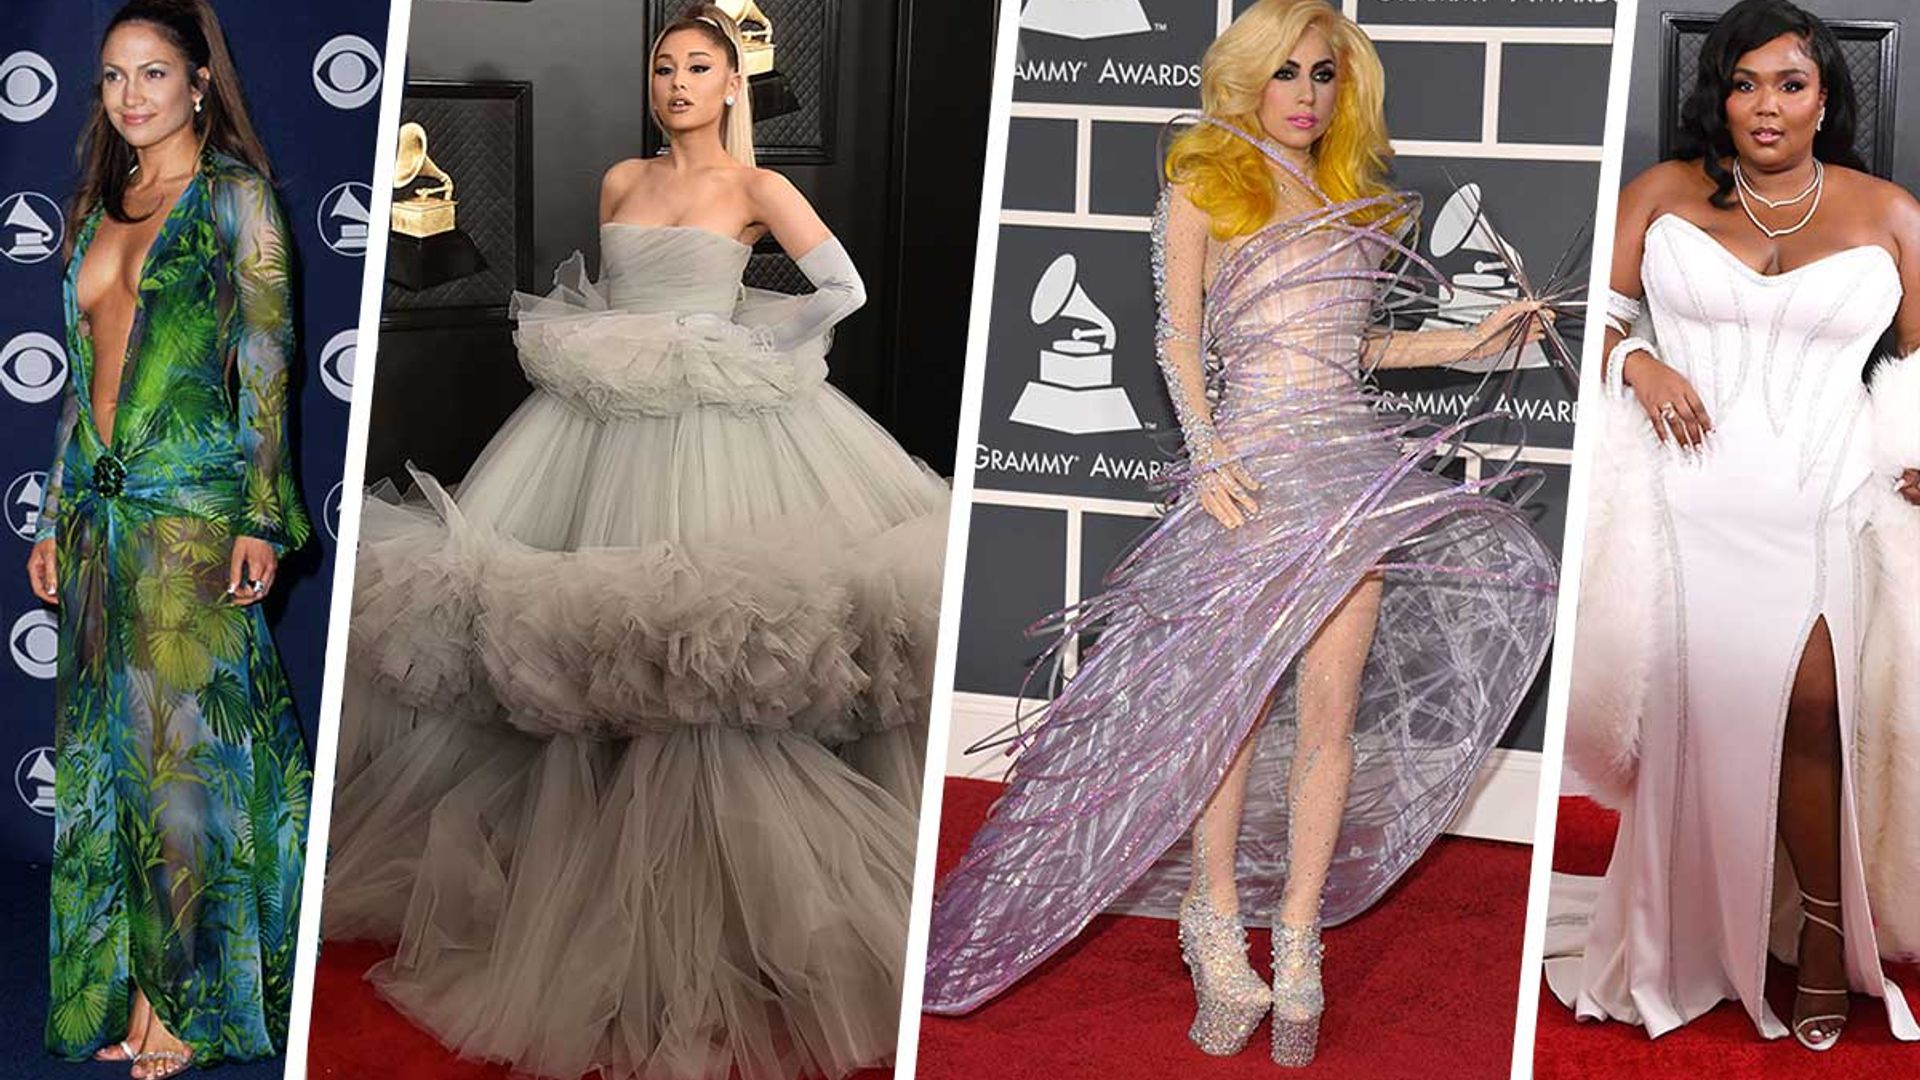 Grammy Awards: The most memorable red carpet looks of all time - best photos